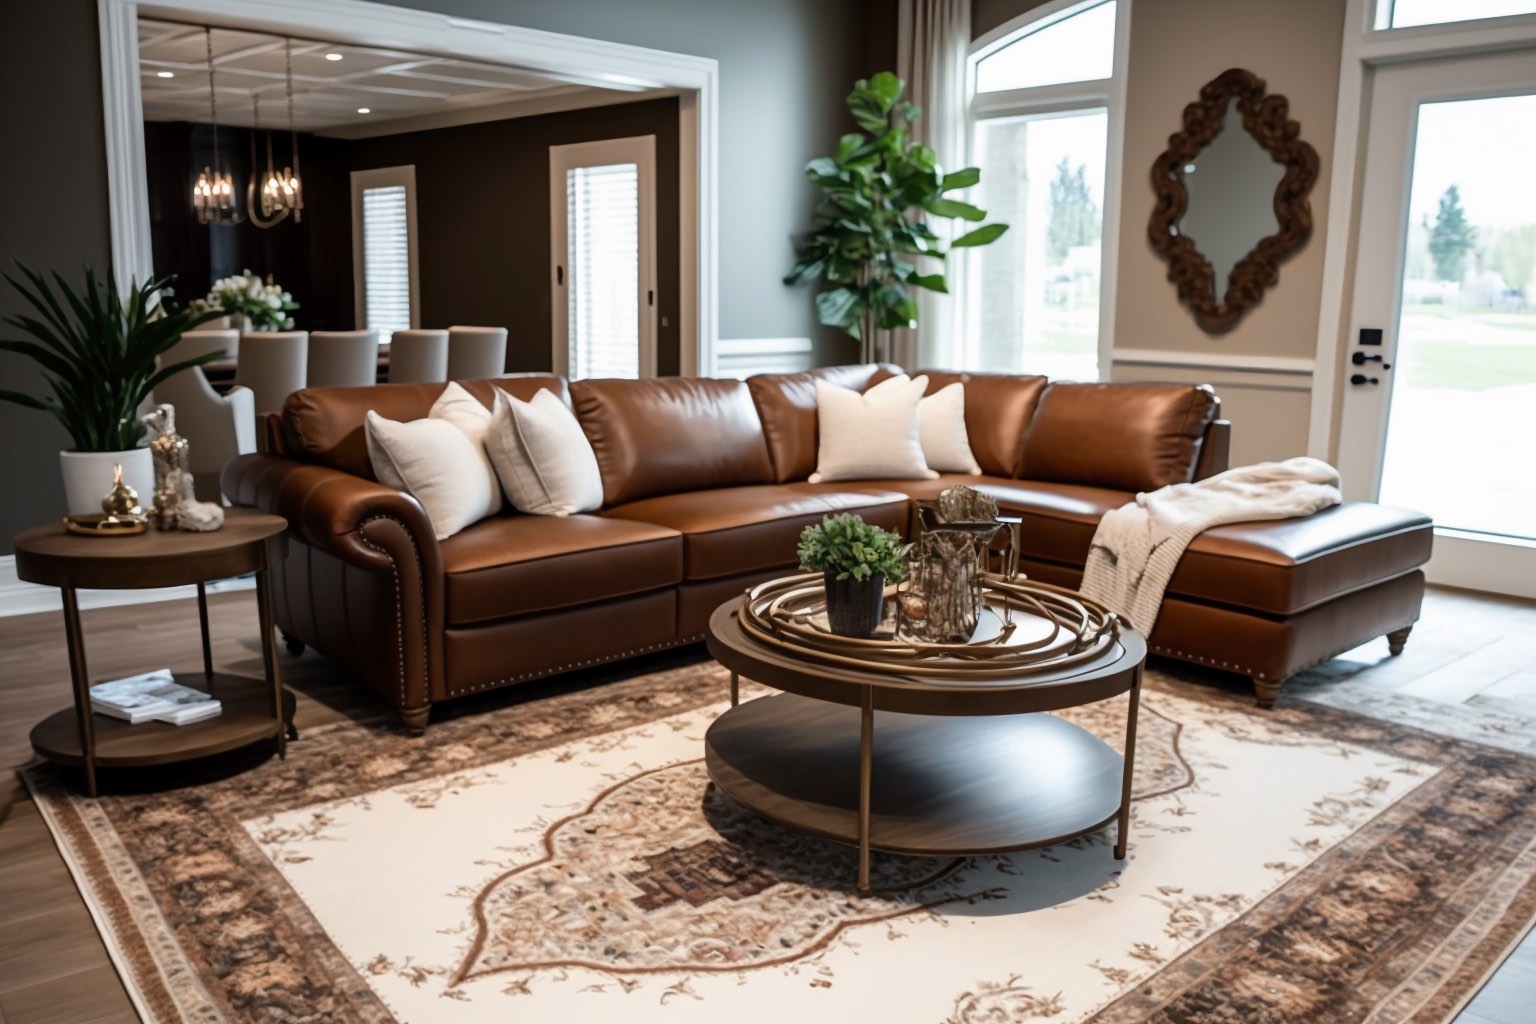 Chateau Dax Designer Italian Furniture In Sophisticated Living Room